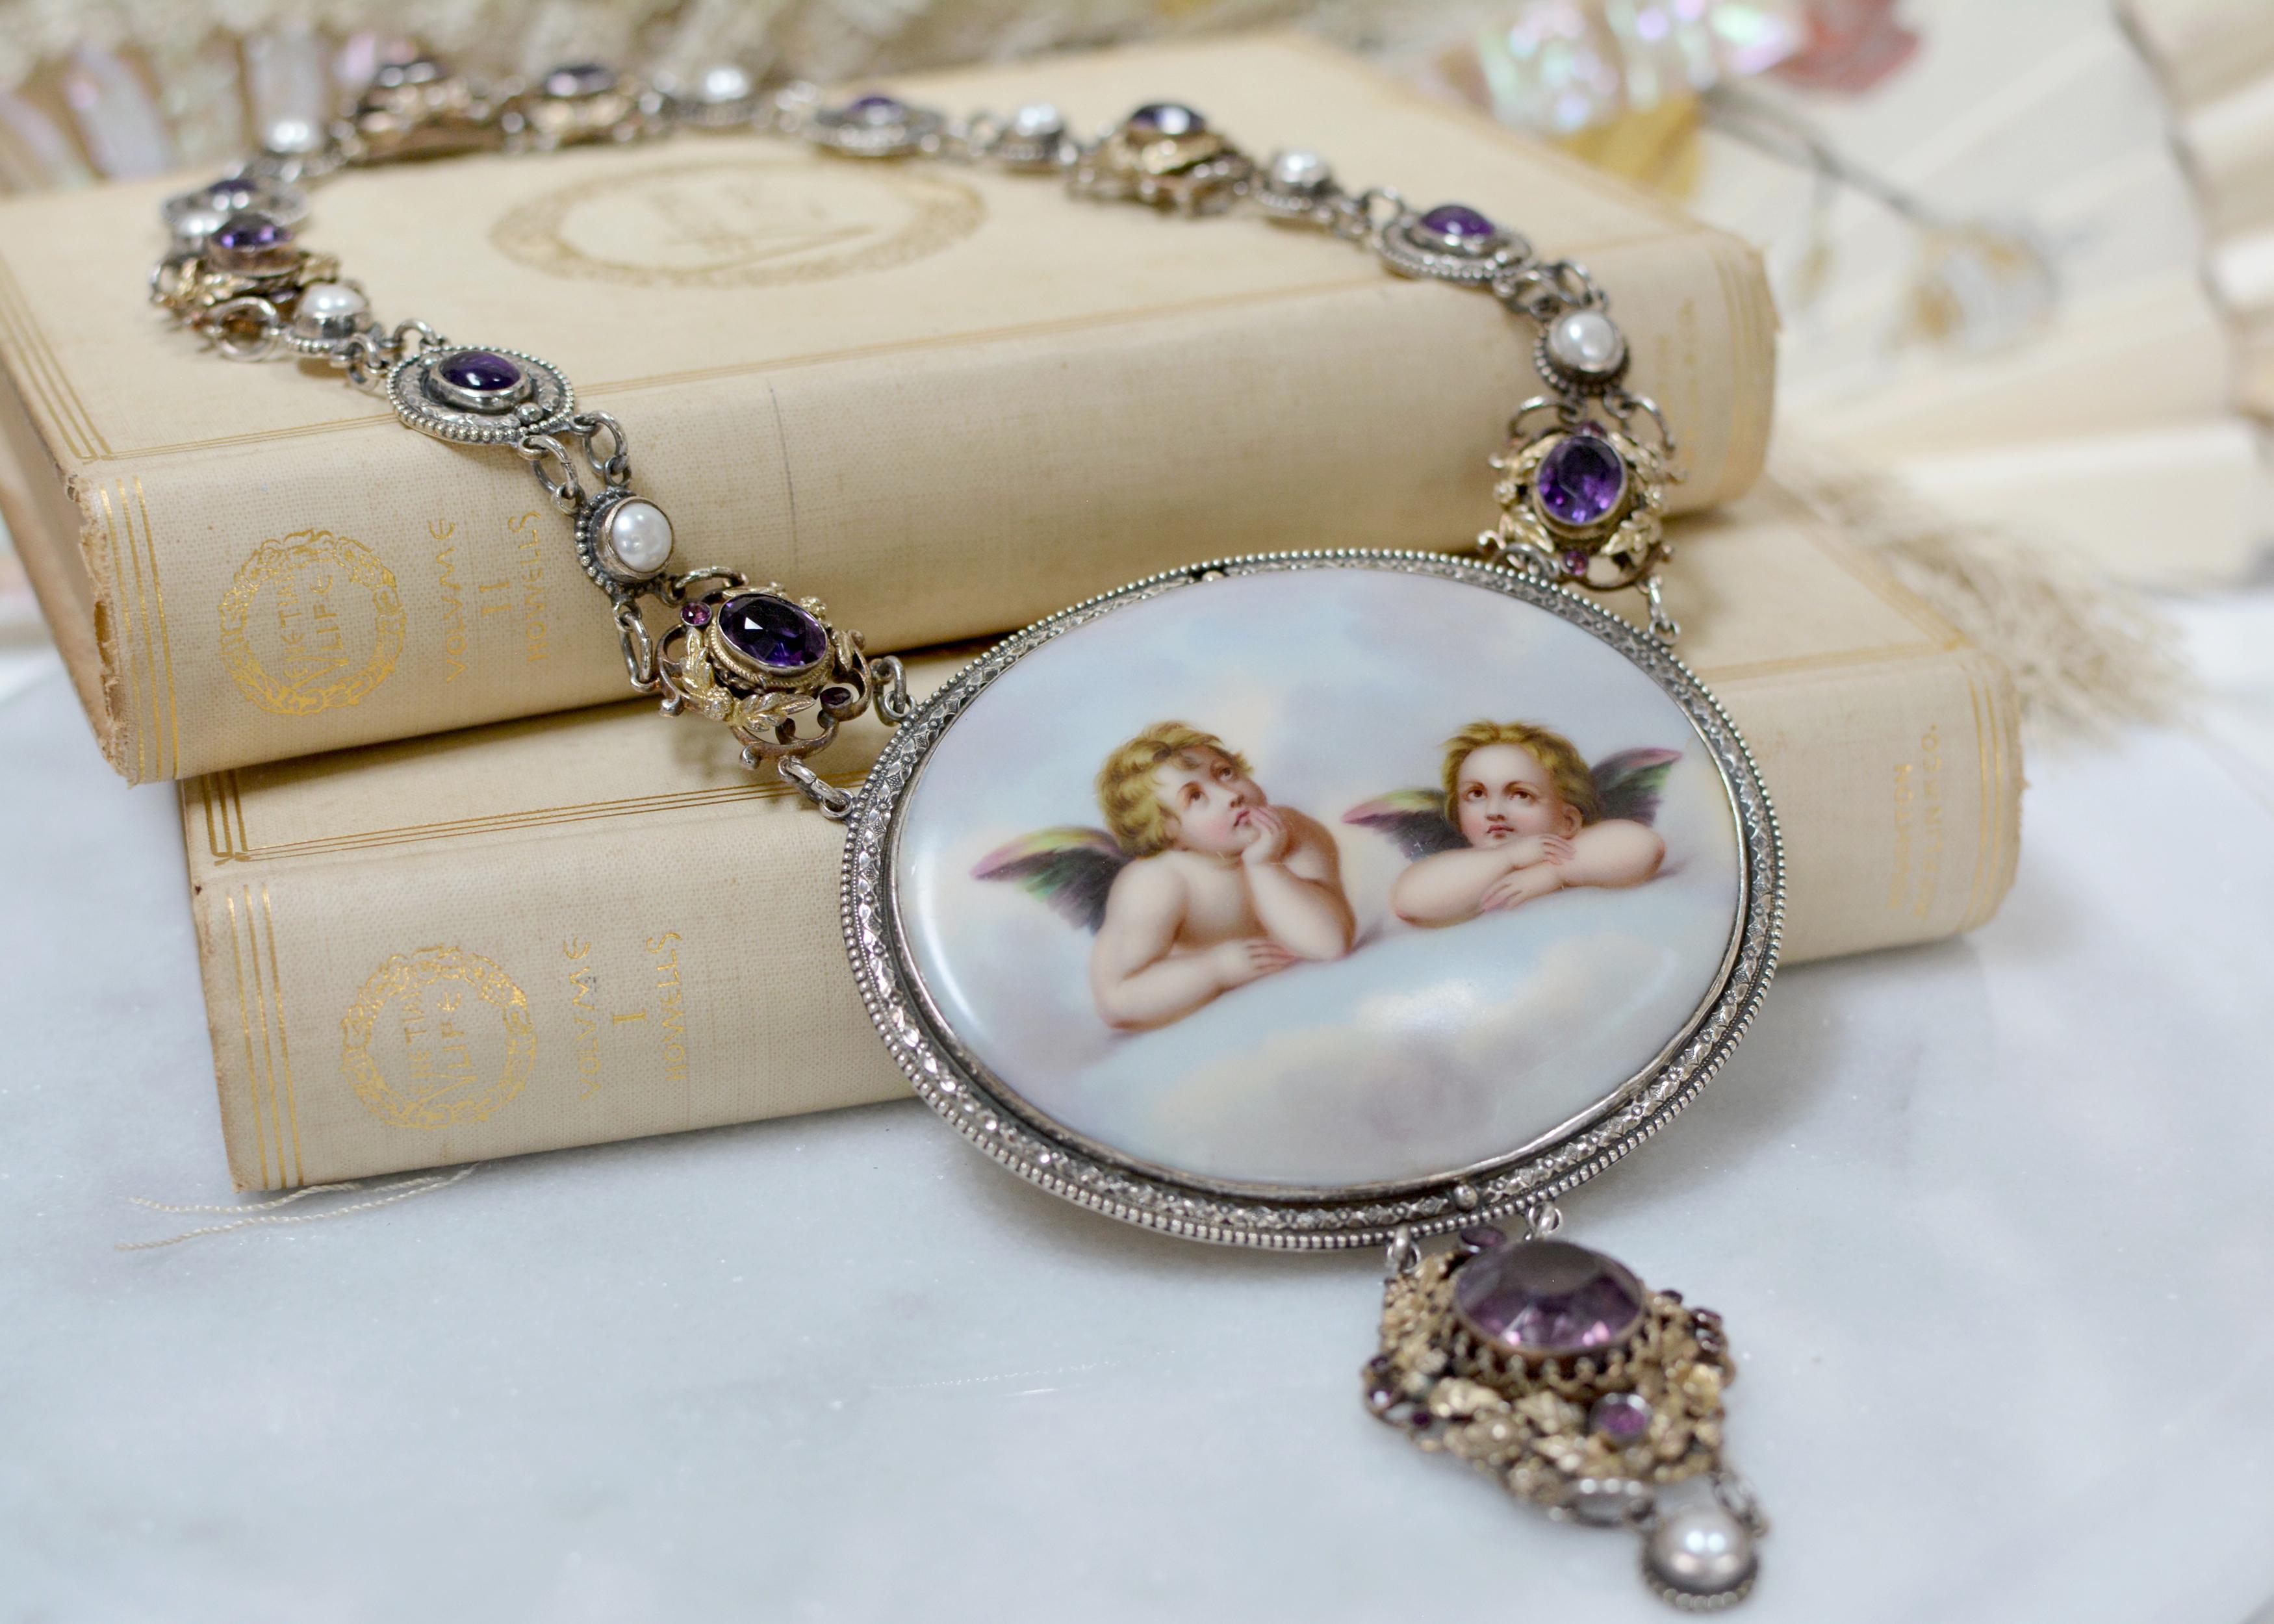 Jill Garber 19th Century Sistine Madonna Angels Portrait Necklace with Amethyst For Sale 7